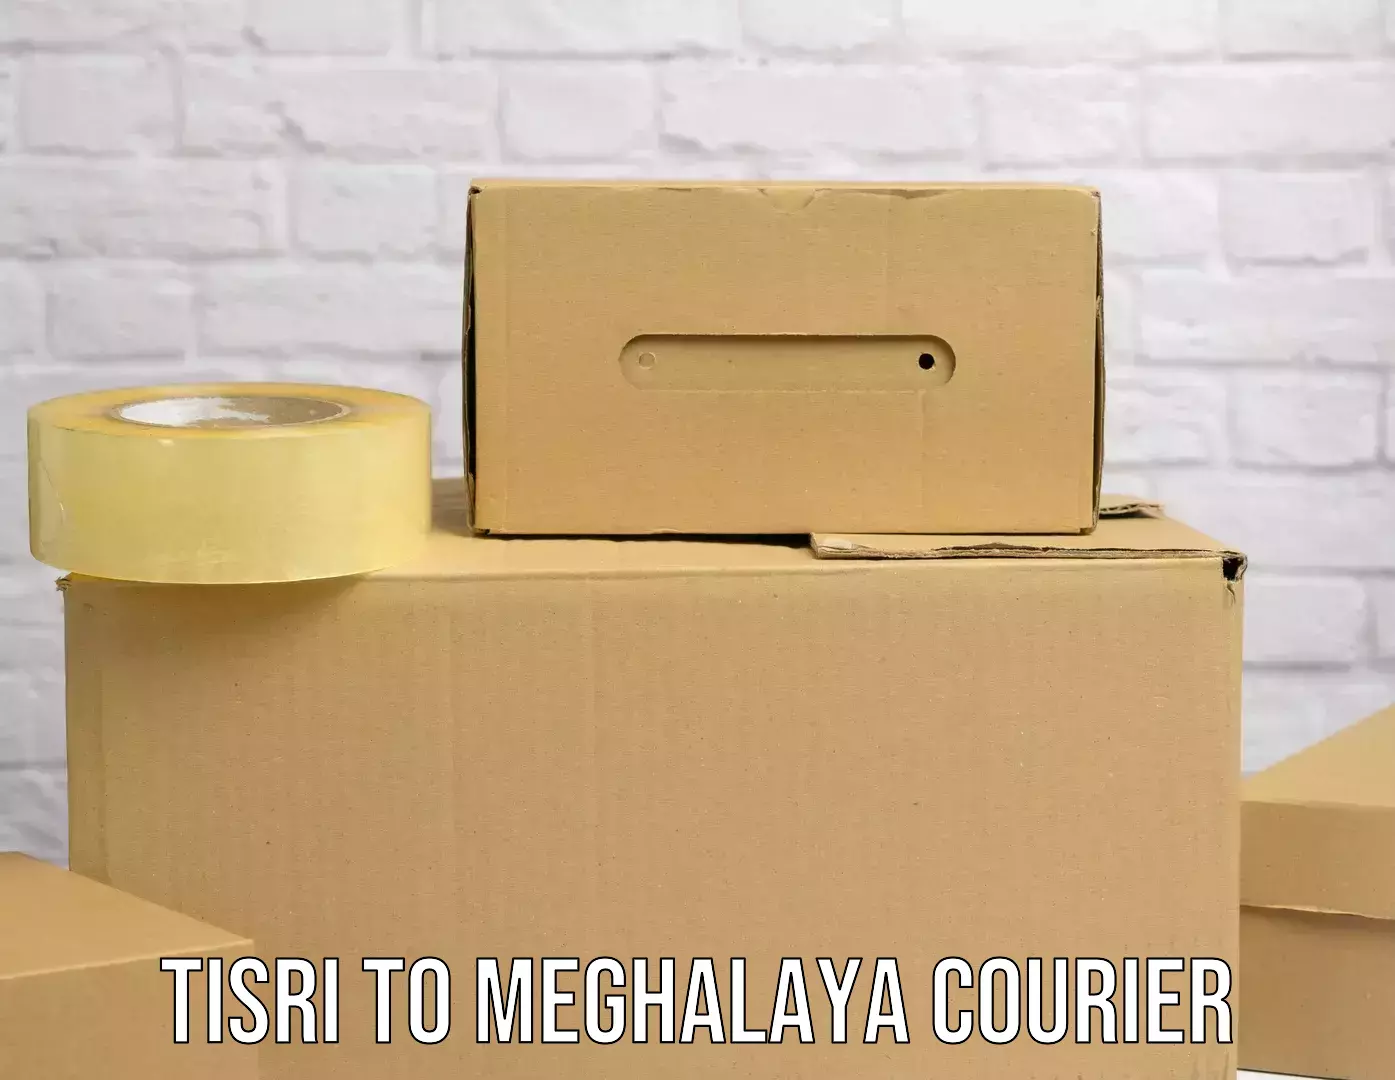 On-call courier service Tisri to Meghalaya